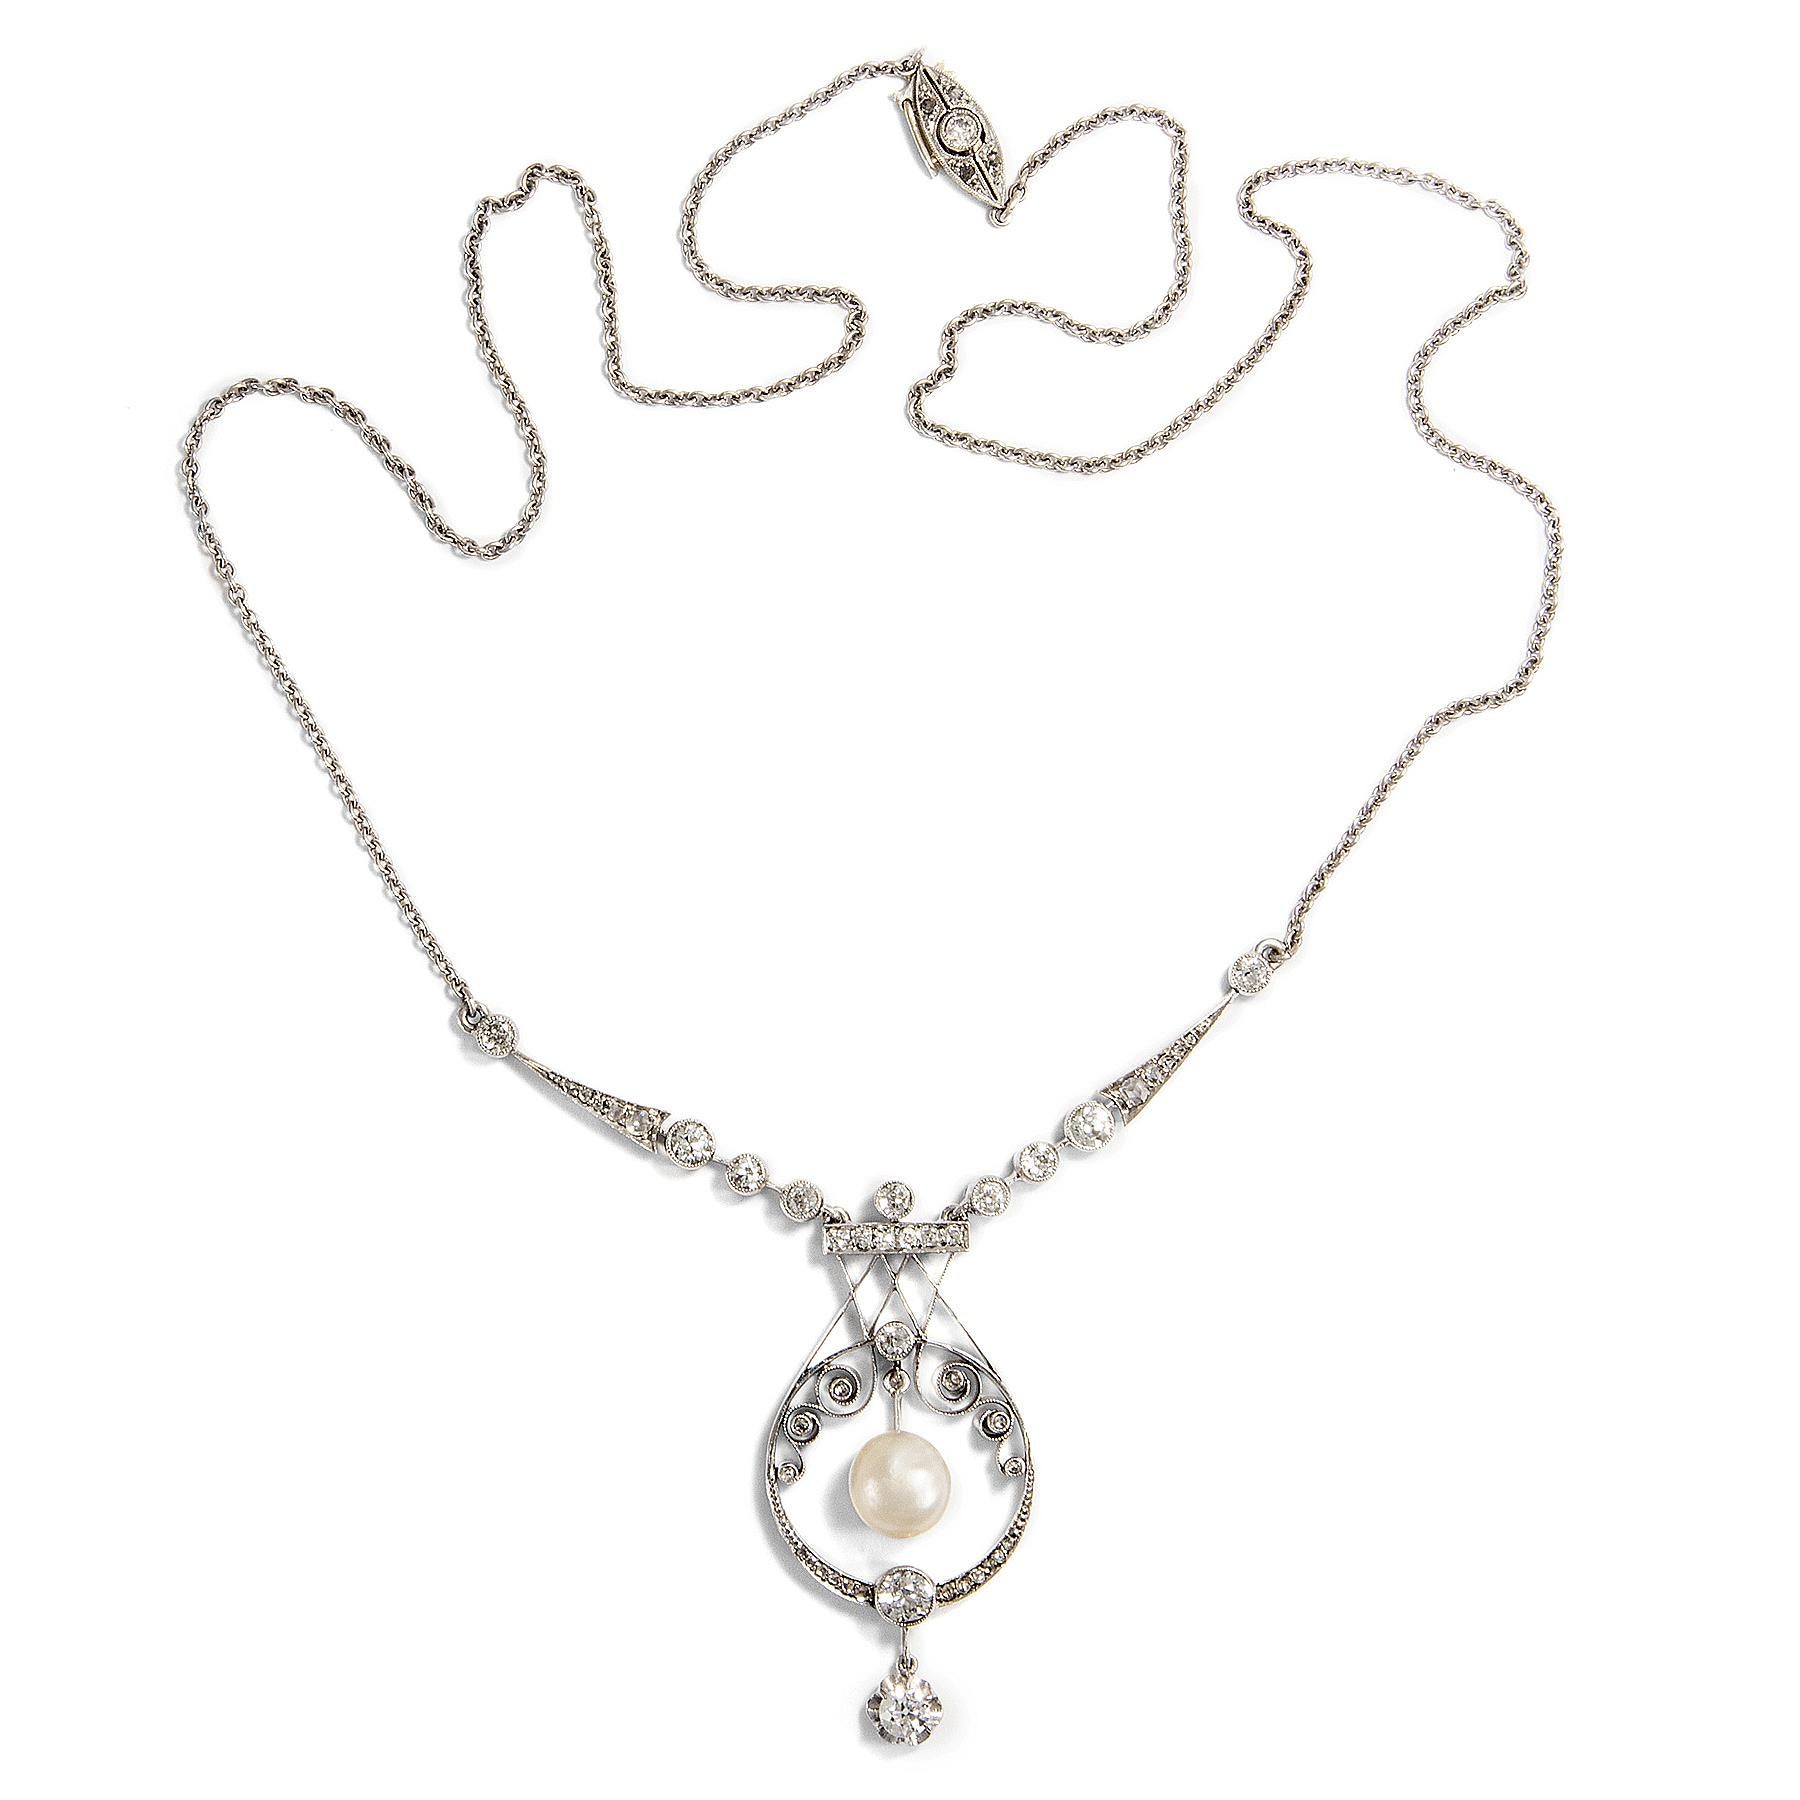 The white nights of Saint Petersburg – this necklace might have been present through some of them, more than a century ago in the last years of Czarist Russia. Following the ethereal taste of its time, it is fashioned entirely from white materials,